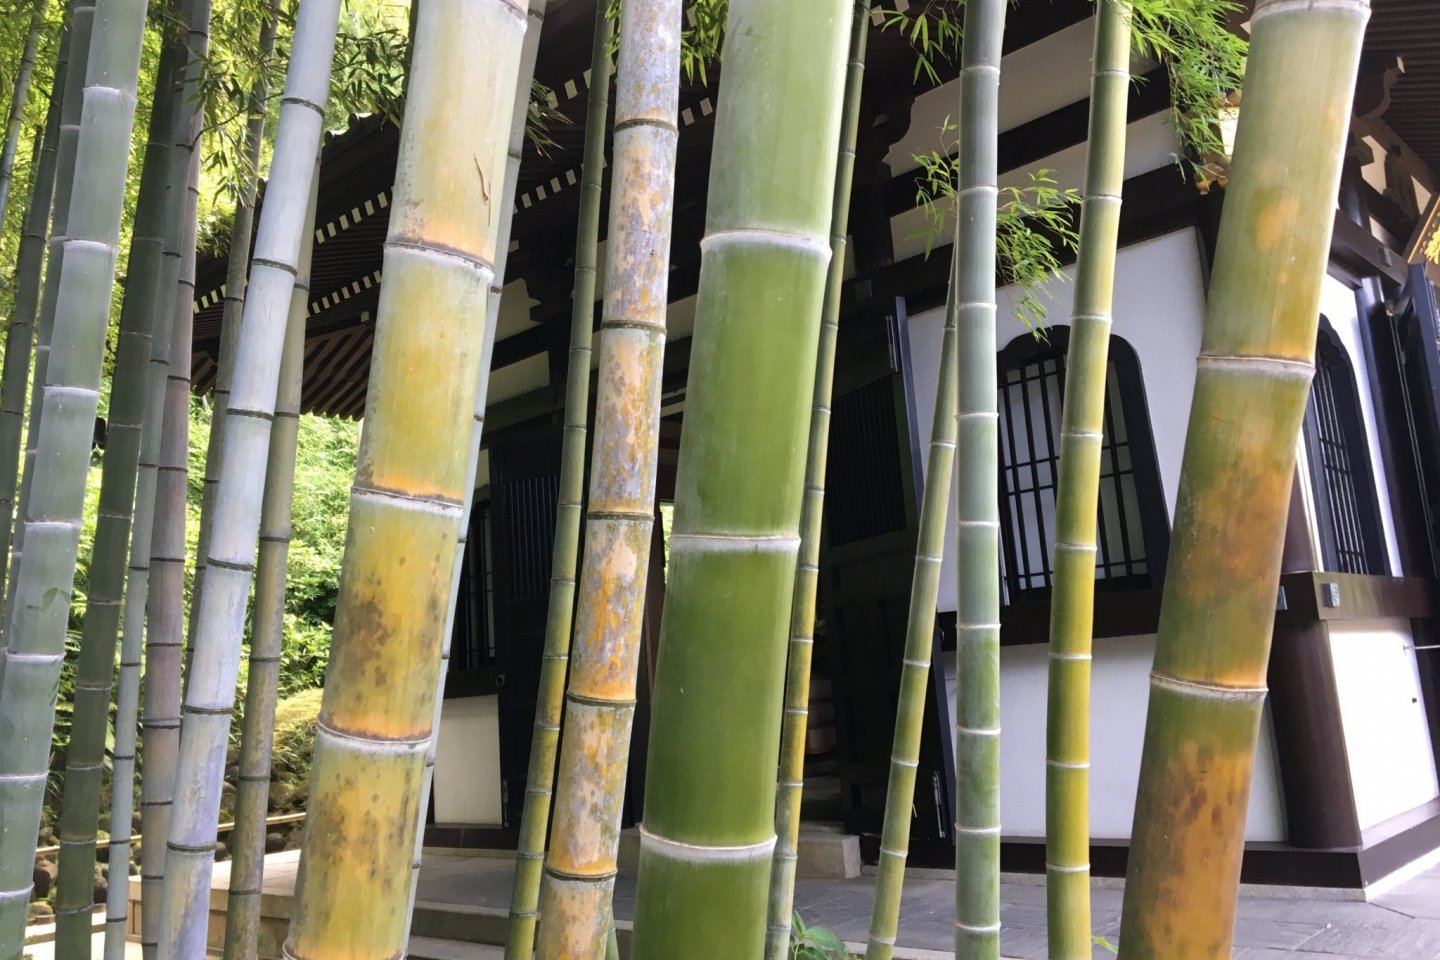 What difference does a bamboo grove make? A temple without bamboos seemed unimaginable